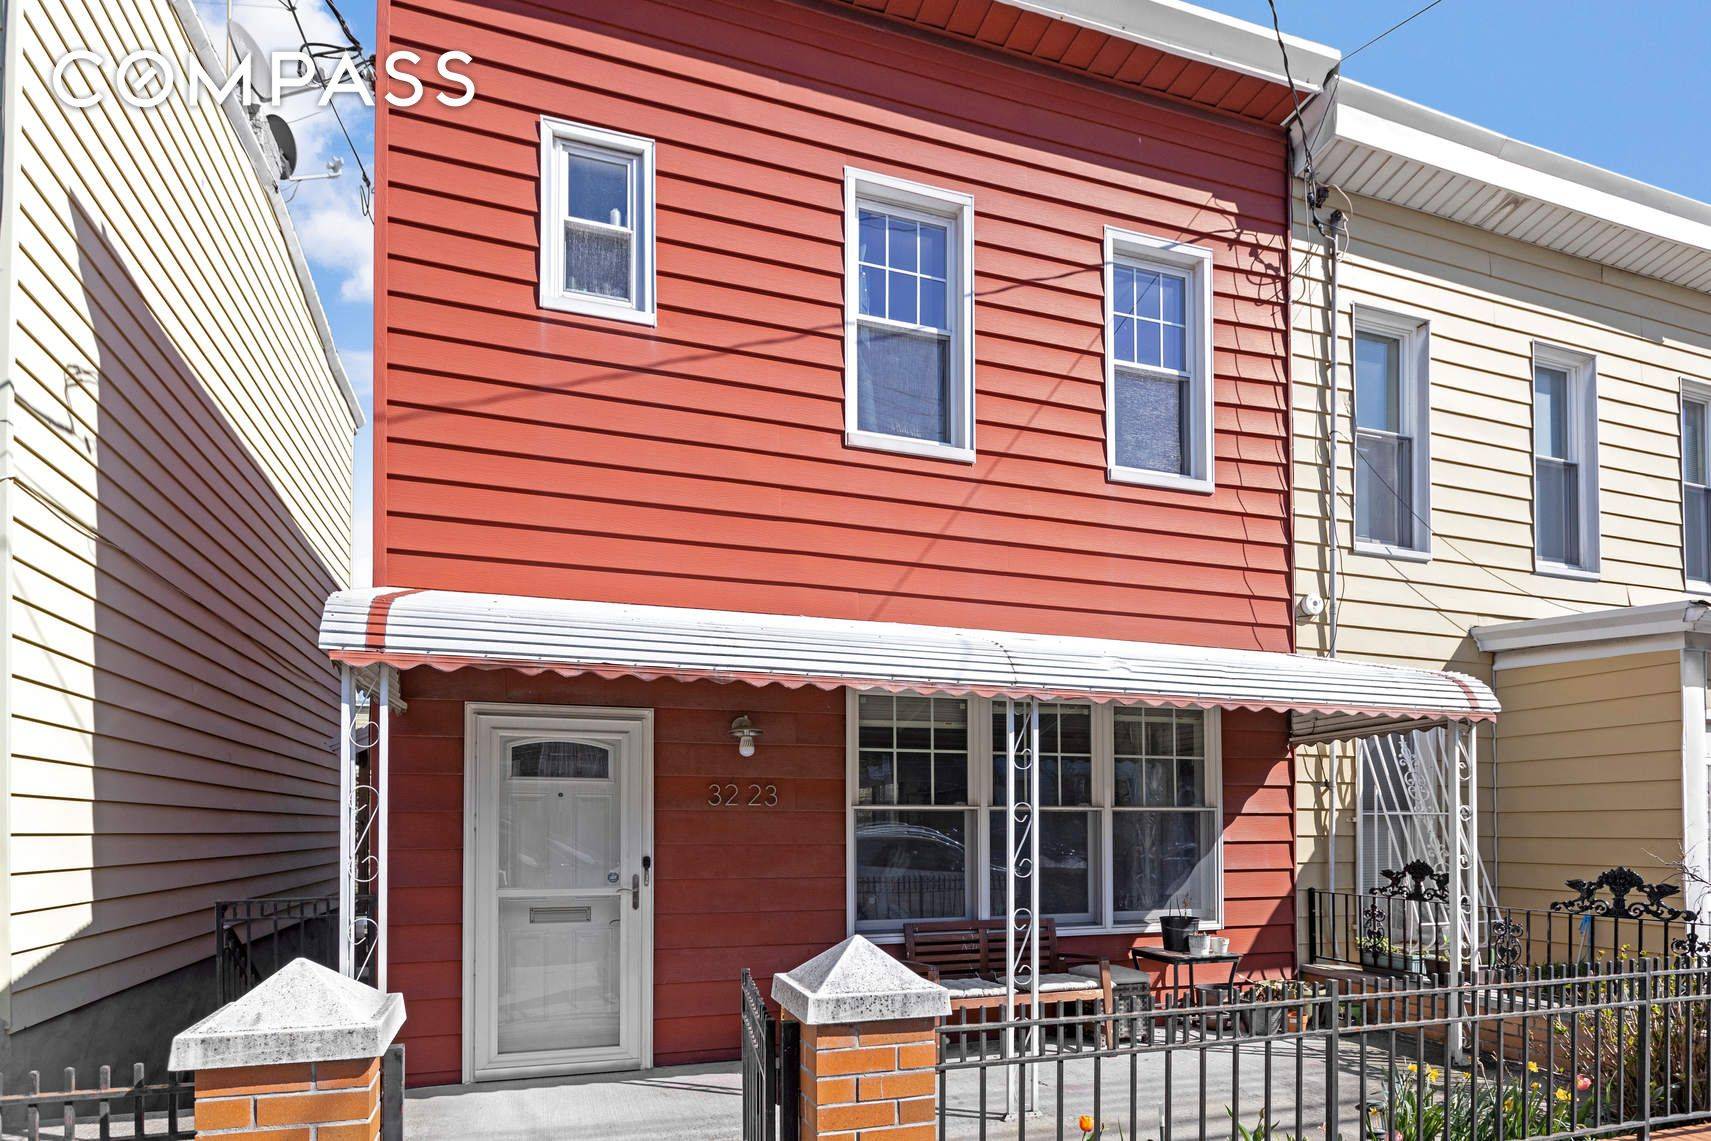 Very pleased to offer a professionally architect designed, restored semi detached single family Astoria townhome This property has the perfect balance of functional living spaces with modern appointments.